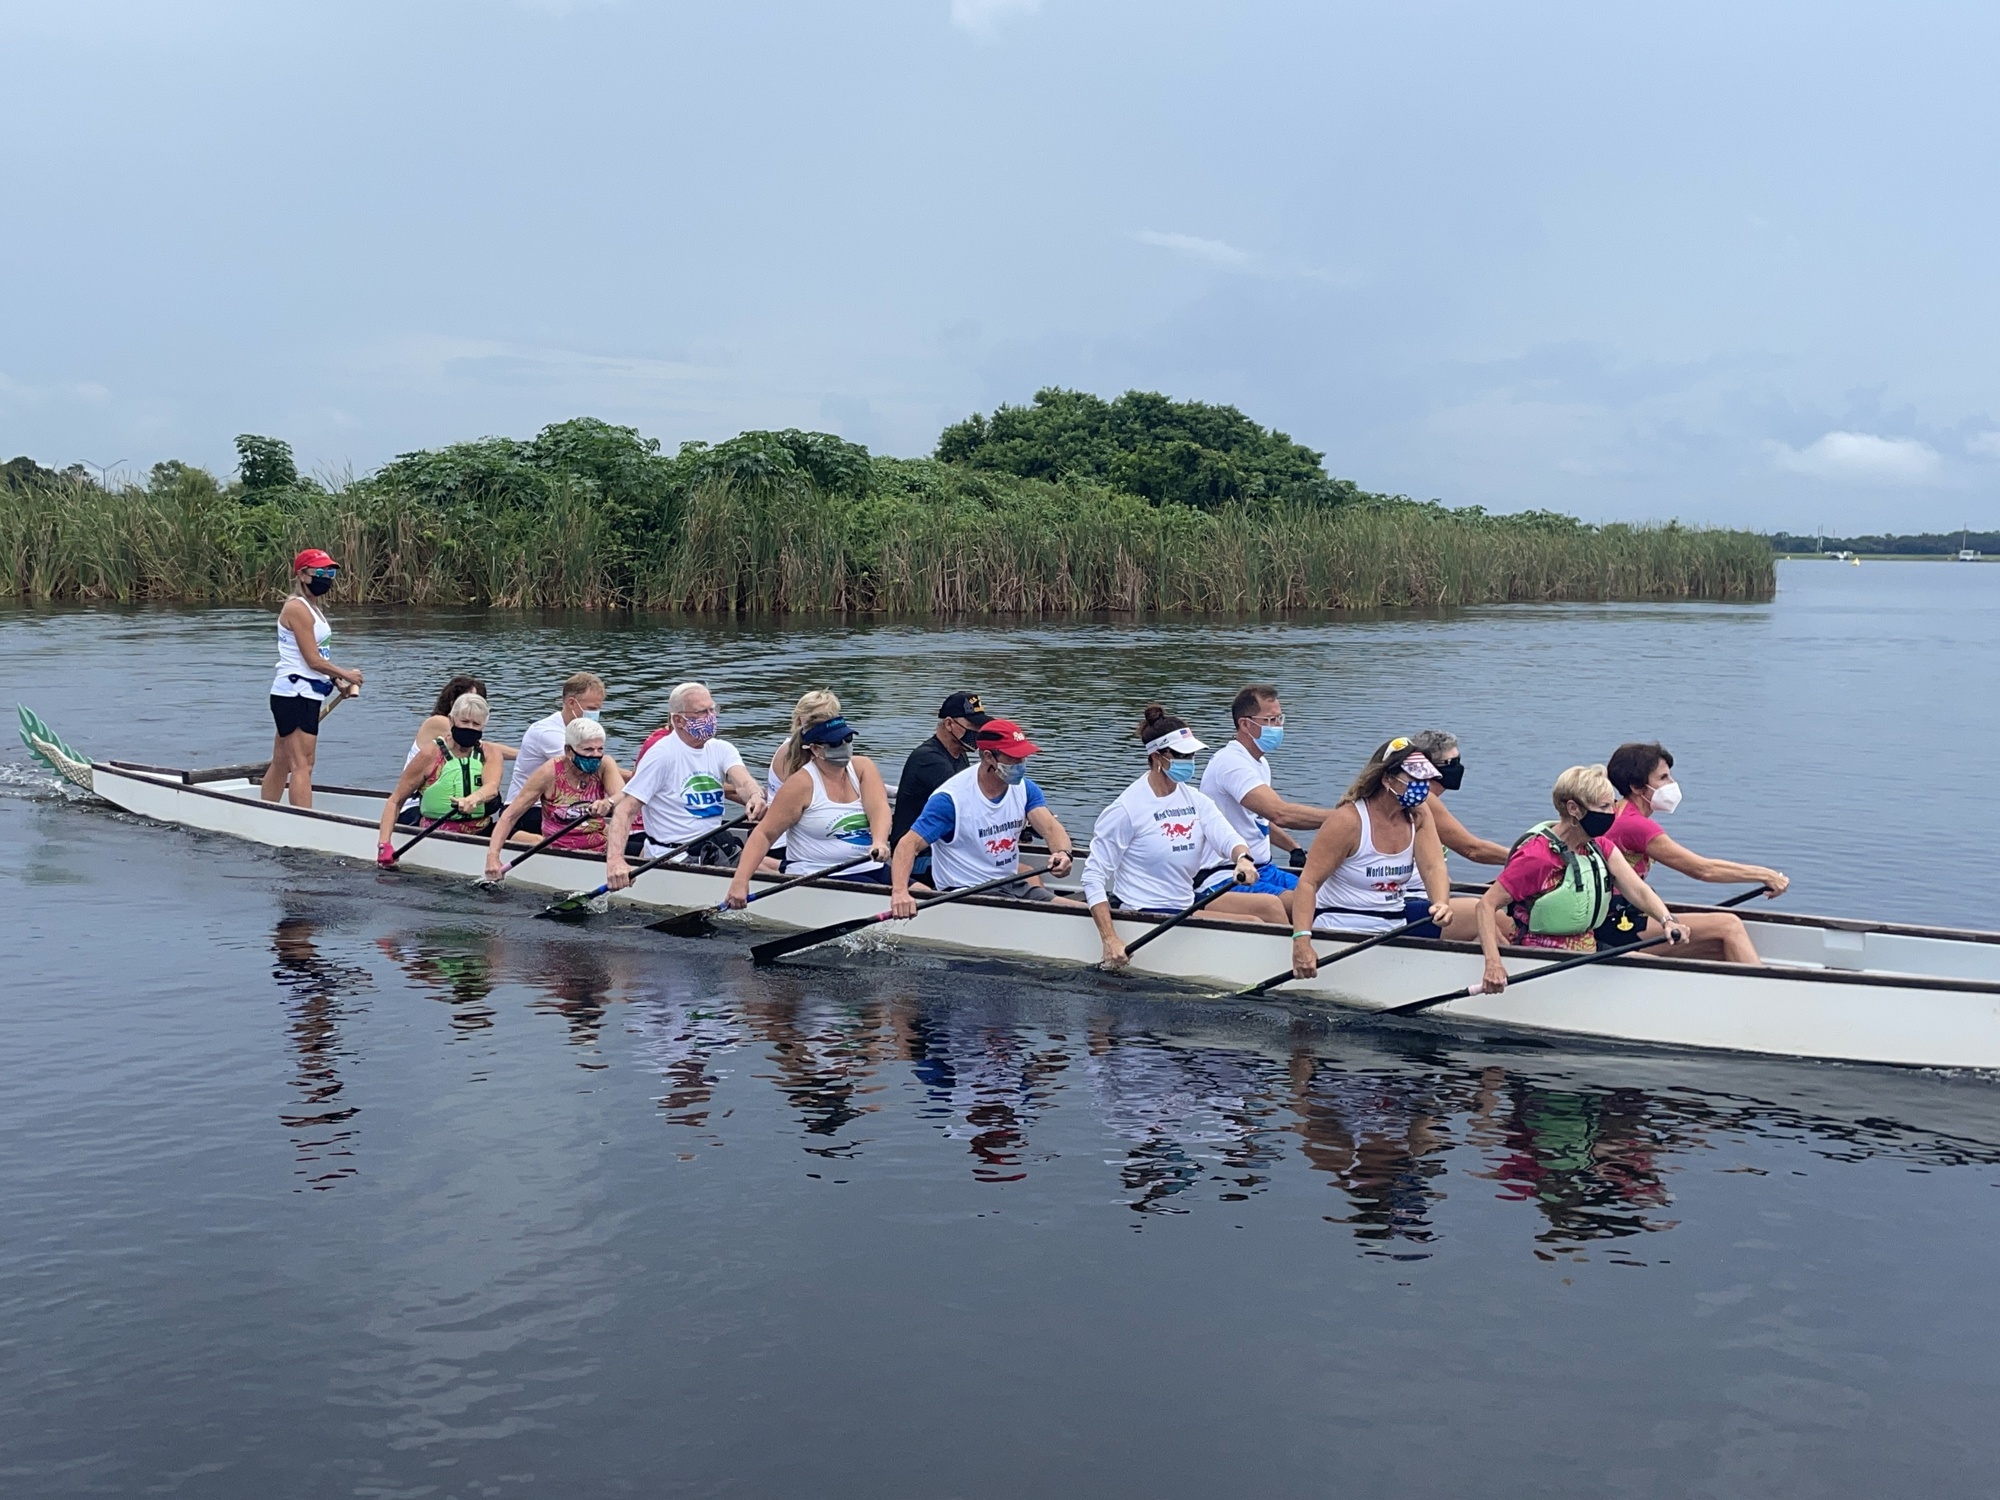 Paddlers from the NBP Dragons and Survivors in Sync get in some practice before the Club Crew Championships, to be held Oct. 1-3 at Nathan Benderson Park.